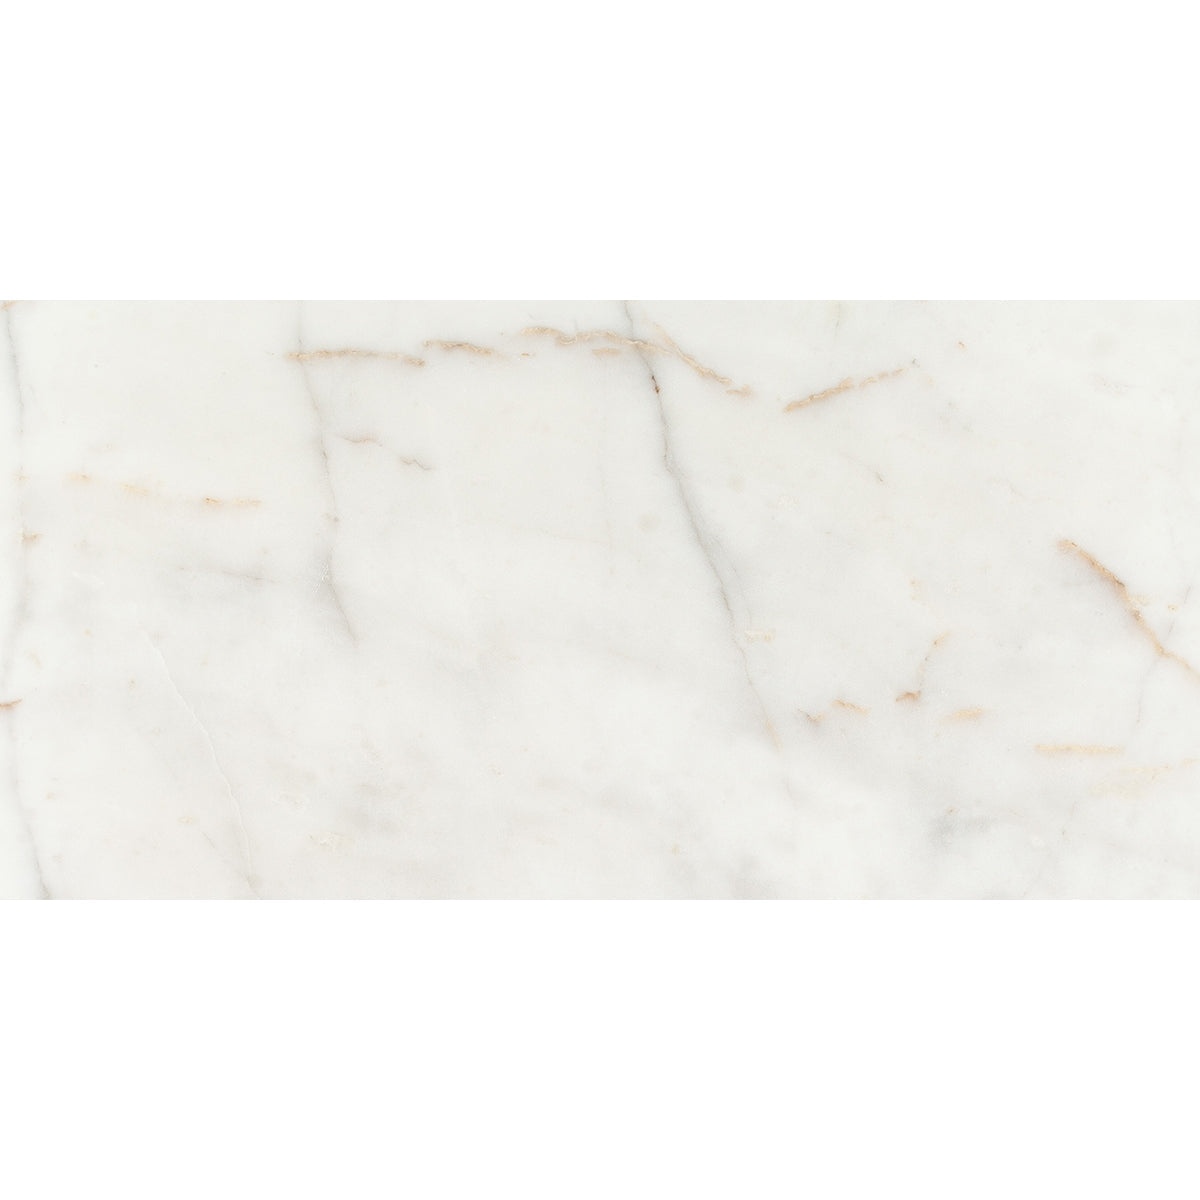 white pearl marble natural stone field tile rectangle shape polished finish 12 by 24 by 3 of 8 straight edge for interior and exterior applications in shower kitchen bathroom backsplash floor and wall produced by marble systems and distributed by surface group international